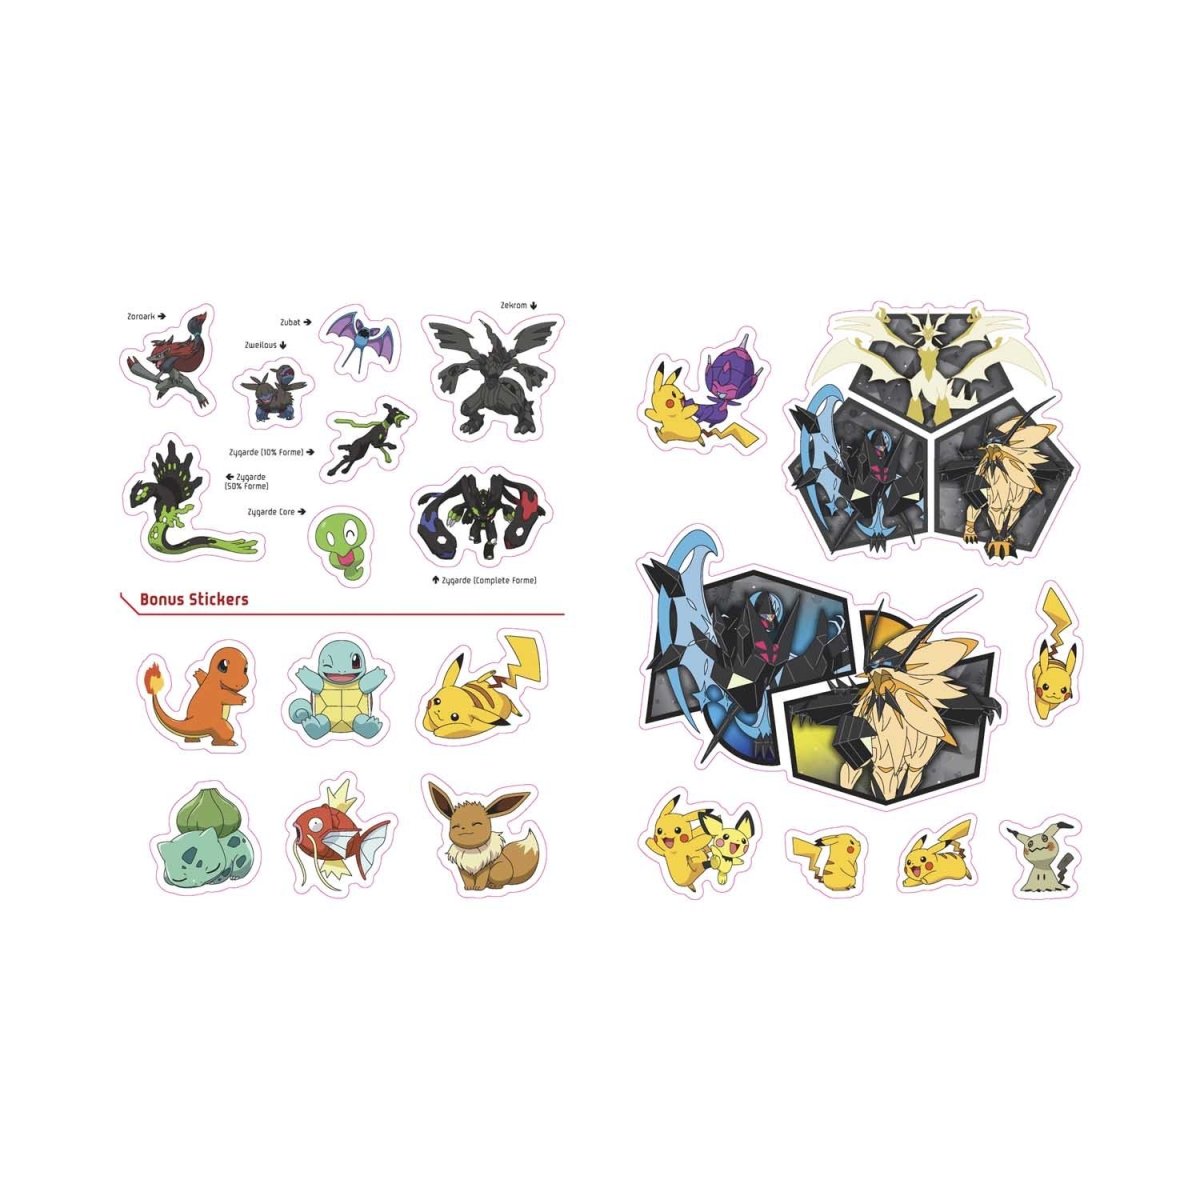 Pokemon Epic Sticker Collection 2nd Edition: From Kanto to Galar